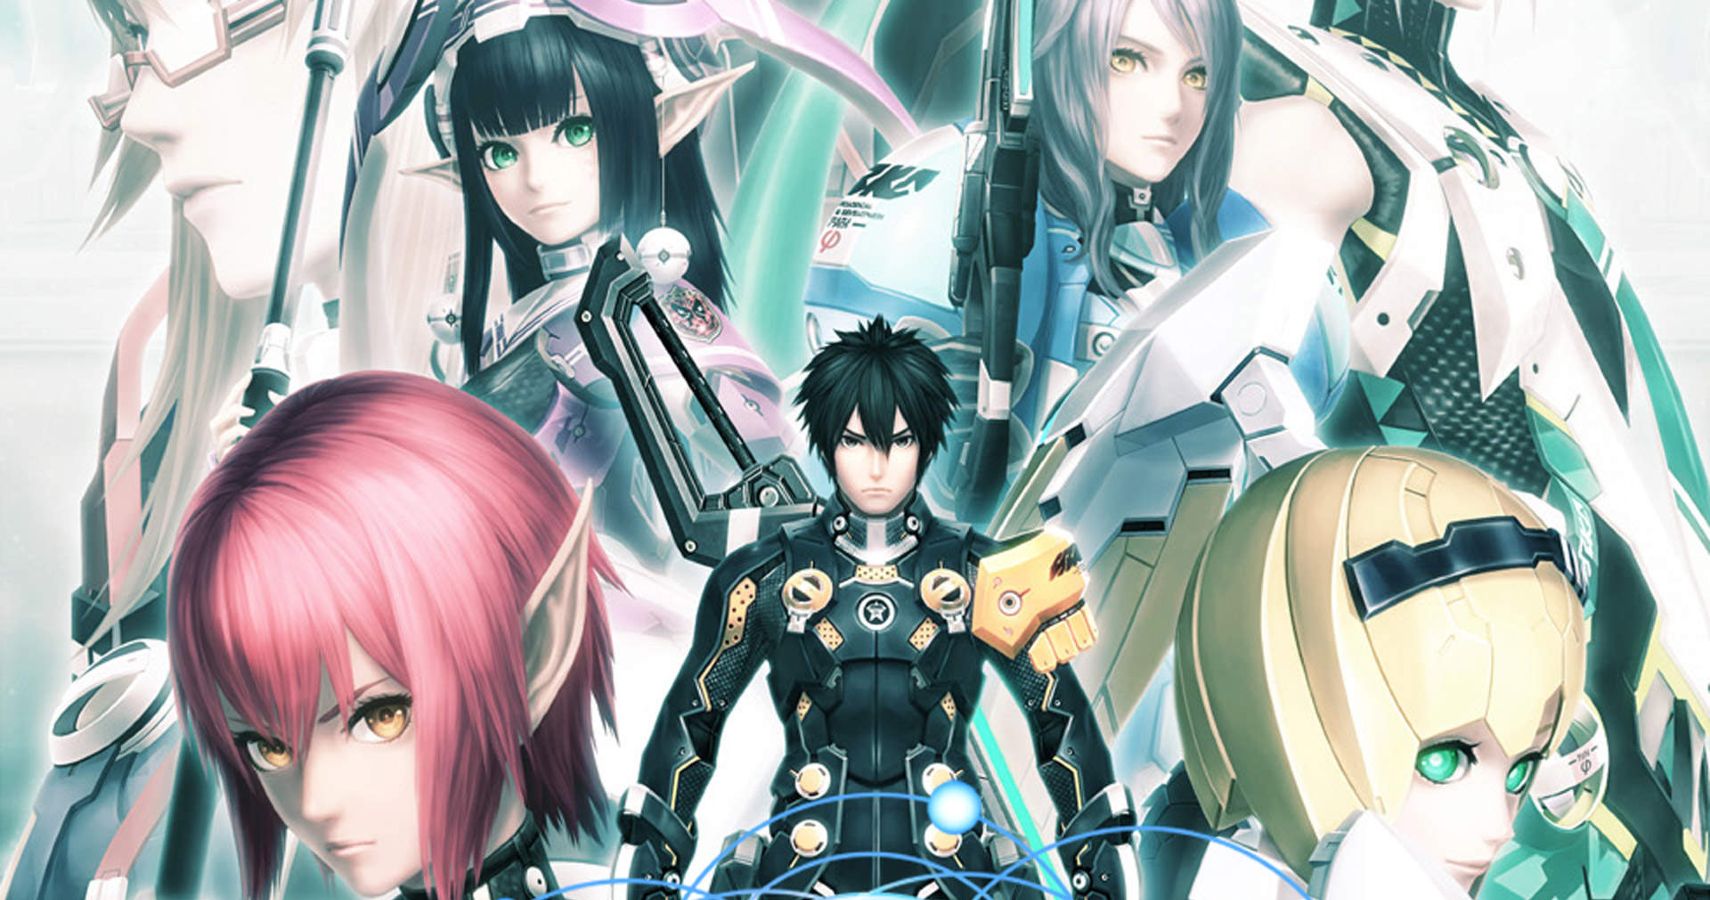 Phantasy Star Online 2: How To Get Into The Beta